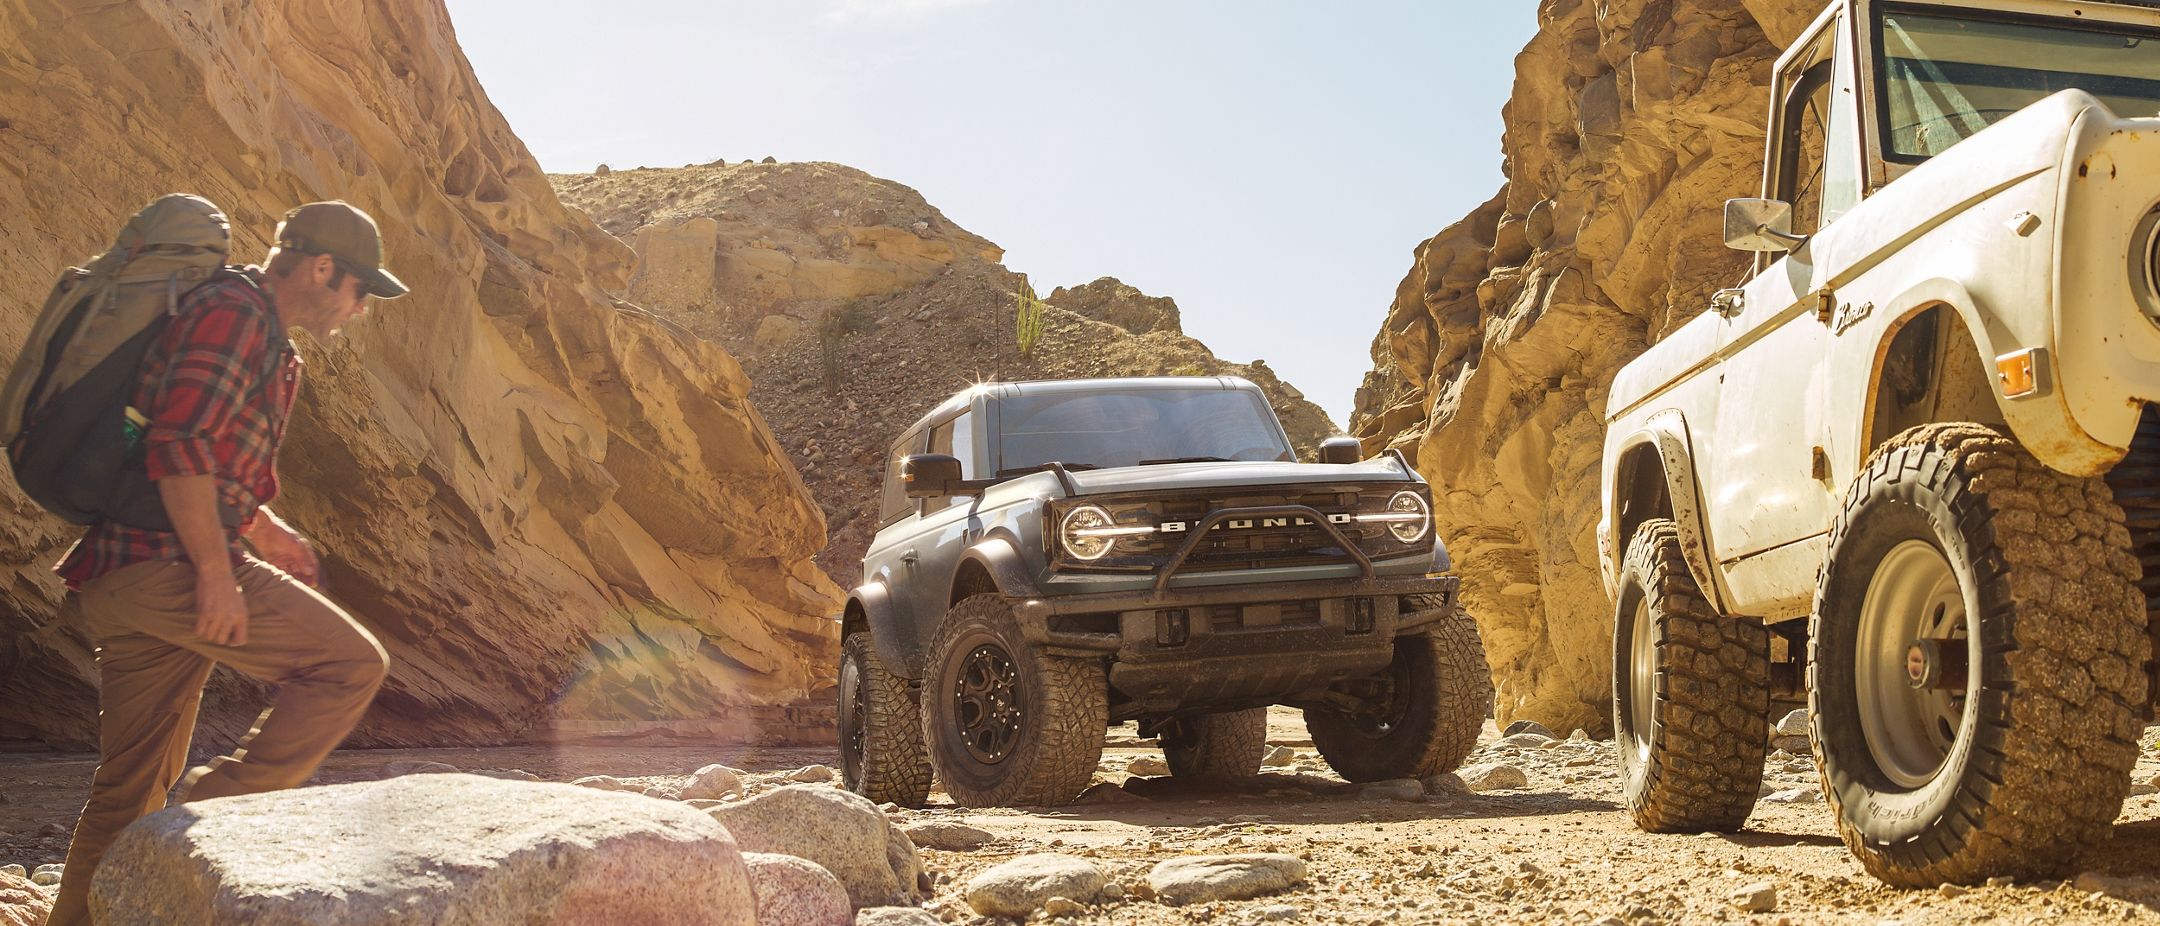 ford agrees to offer 2021 bronco with sasquatch pack stick shift ford agrees to offer 2021 bronco with